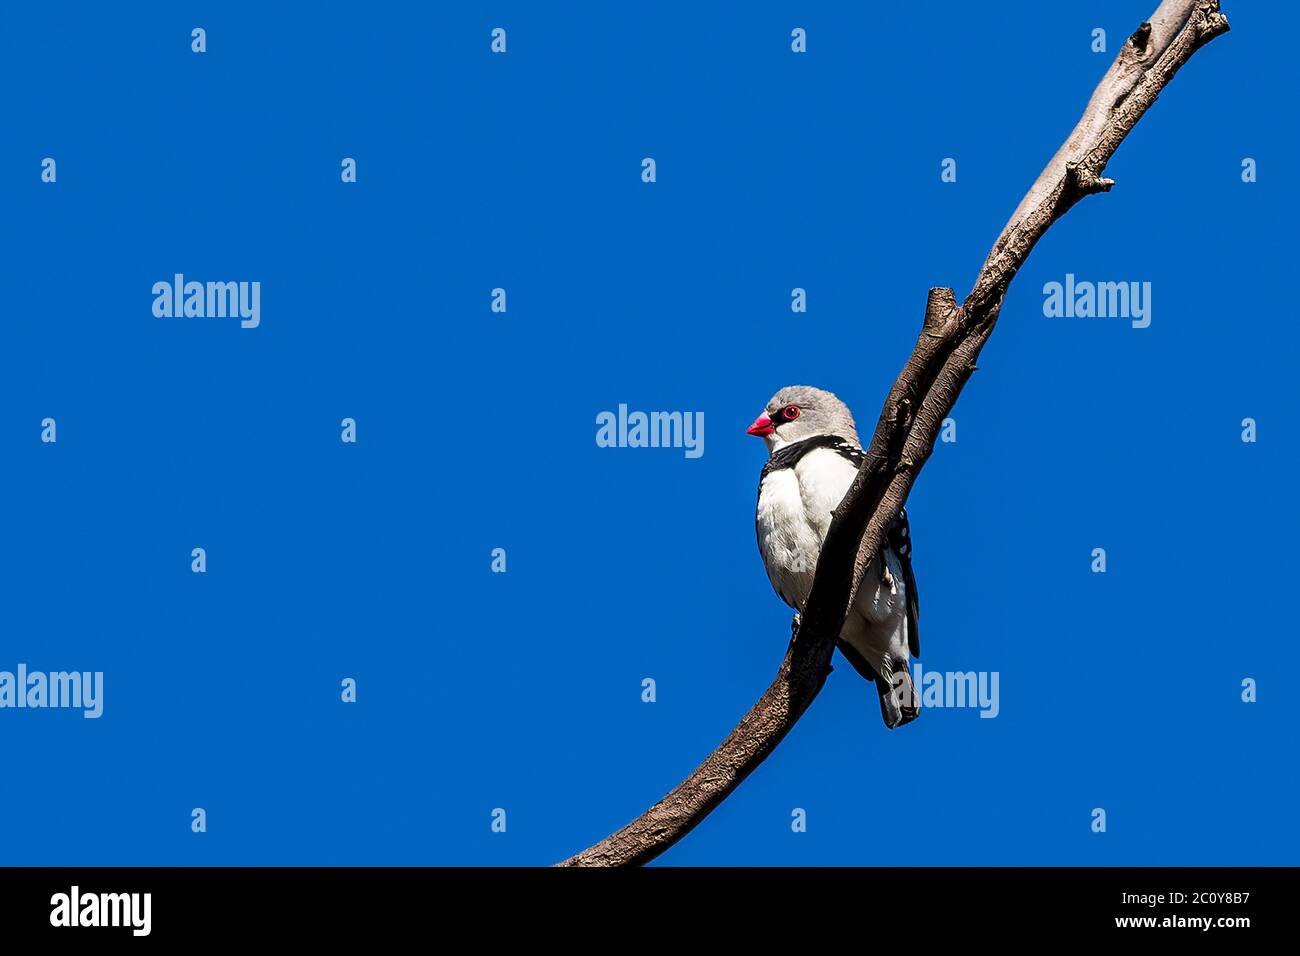 The Diamond Firetail (Stagonopleura guttata) is a small bird with a fiery red rump and tail feathers. Stock Photo